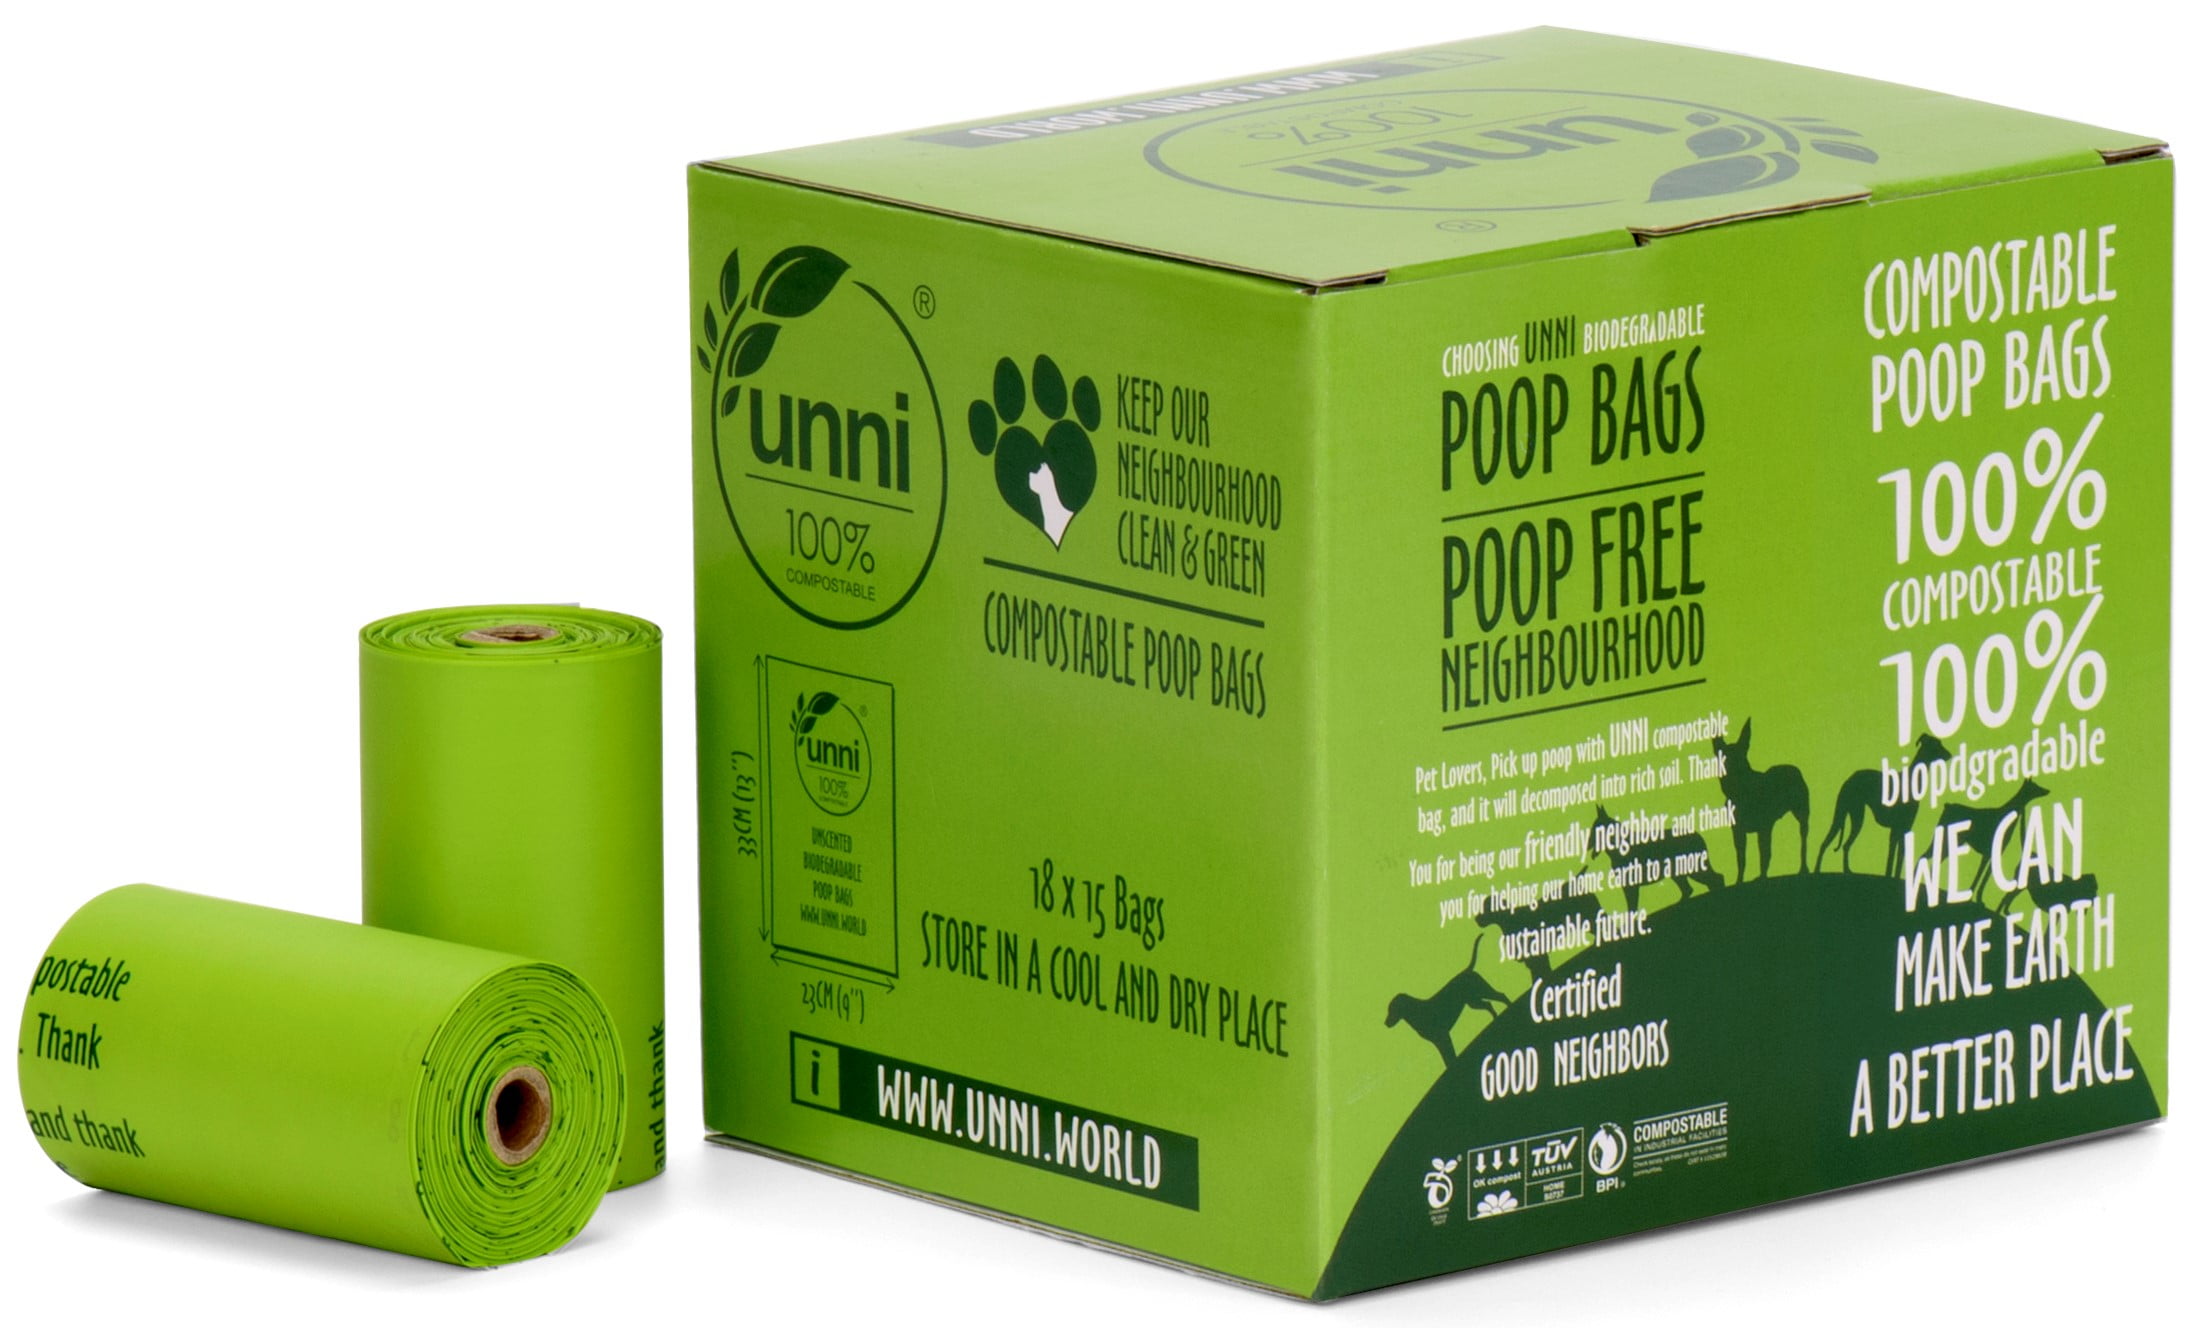 UNNI 100 Compostable Bags 30-33 Gallon 124 Liter 20 Count Extra Thick 1.1  Mils Lawn Leaf Yard Waste Bag Non-GMO ASTM D6400 EN 13432 US BPI Europe OK  Compost Home Certified San Francisco 33 Gallon 20 Count (P